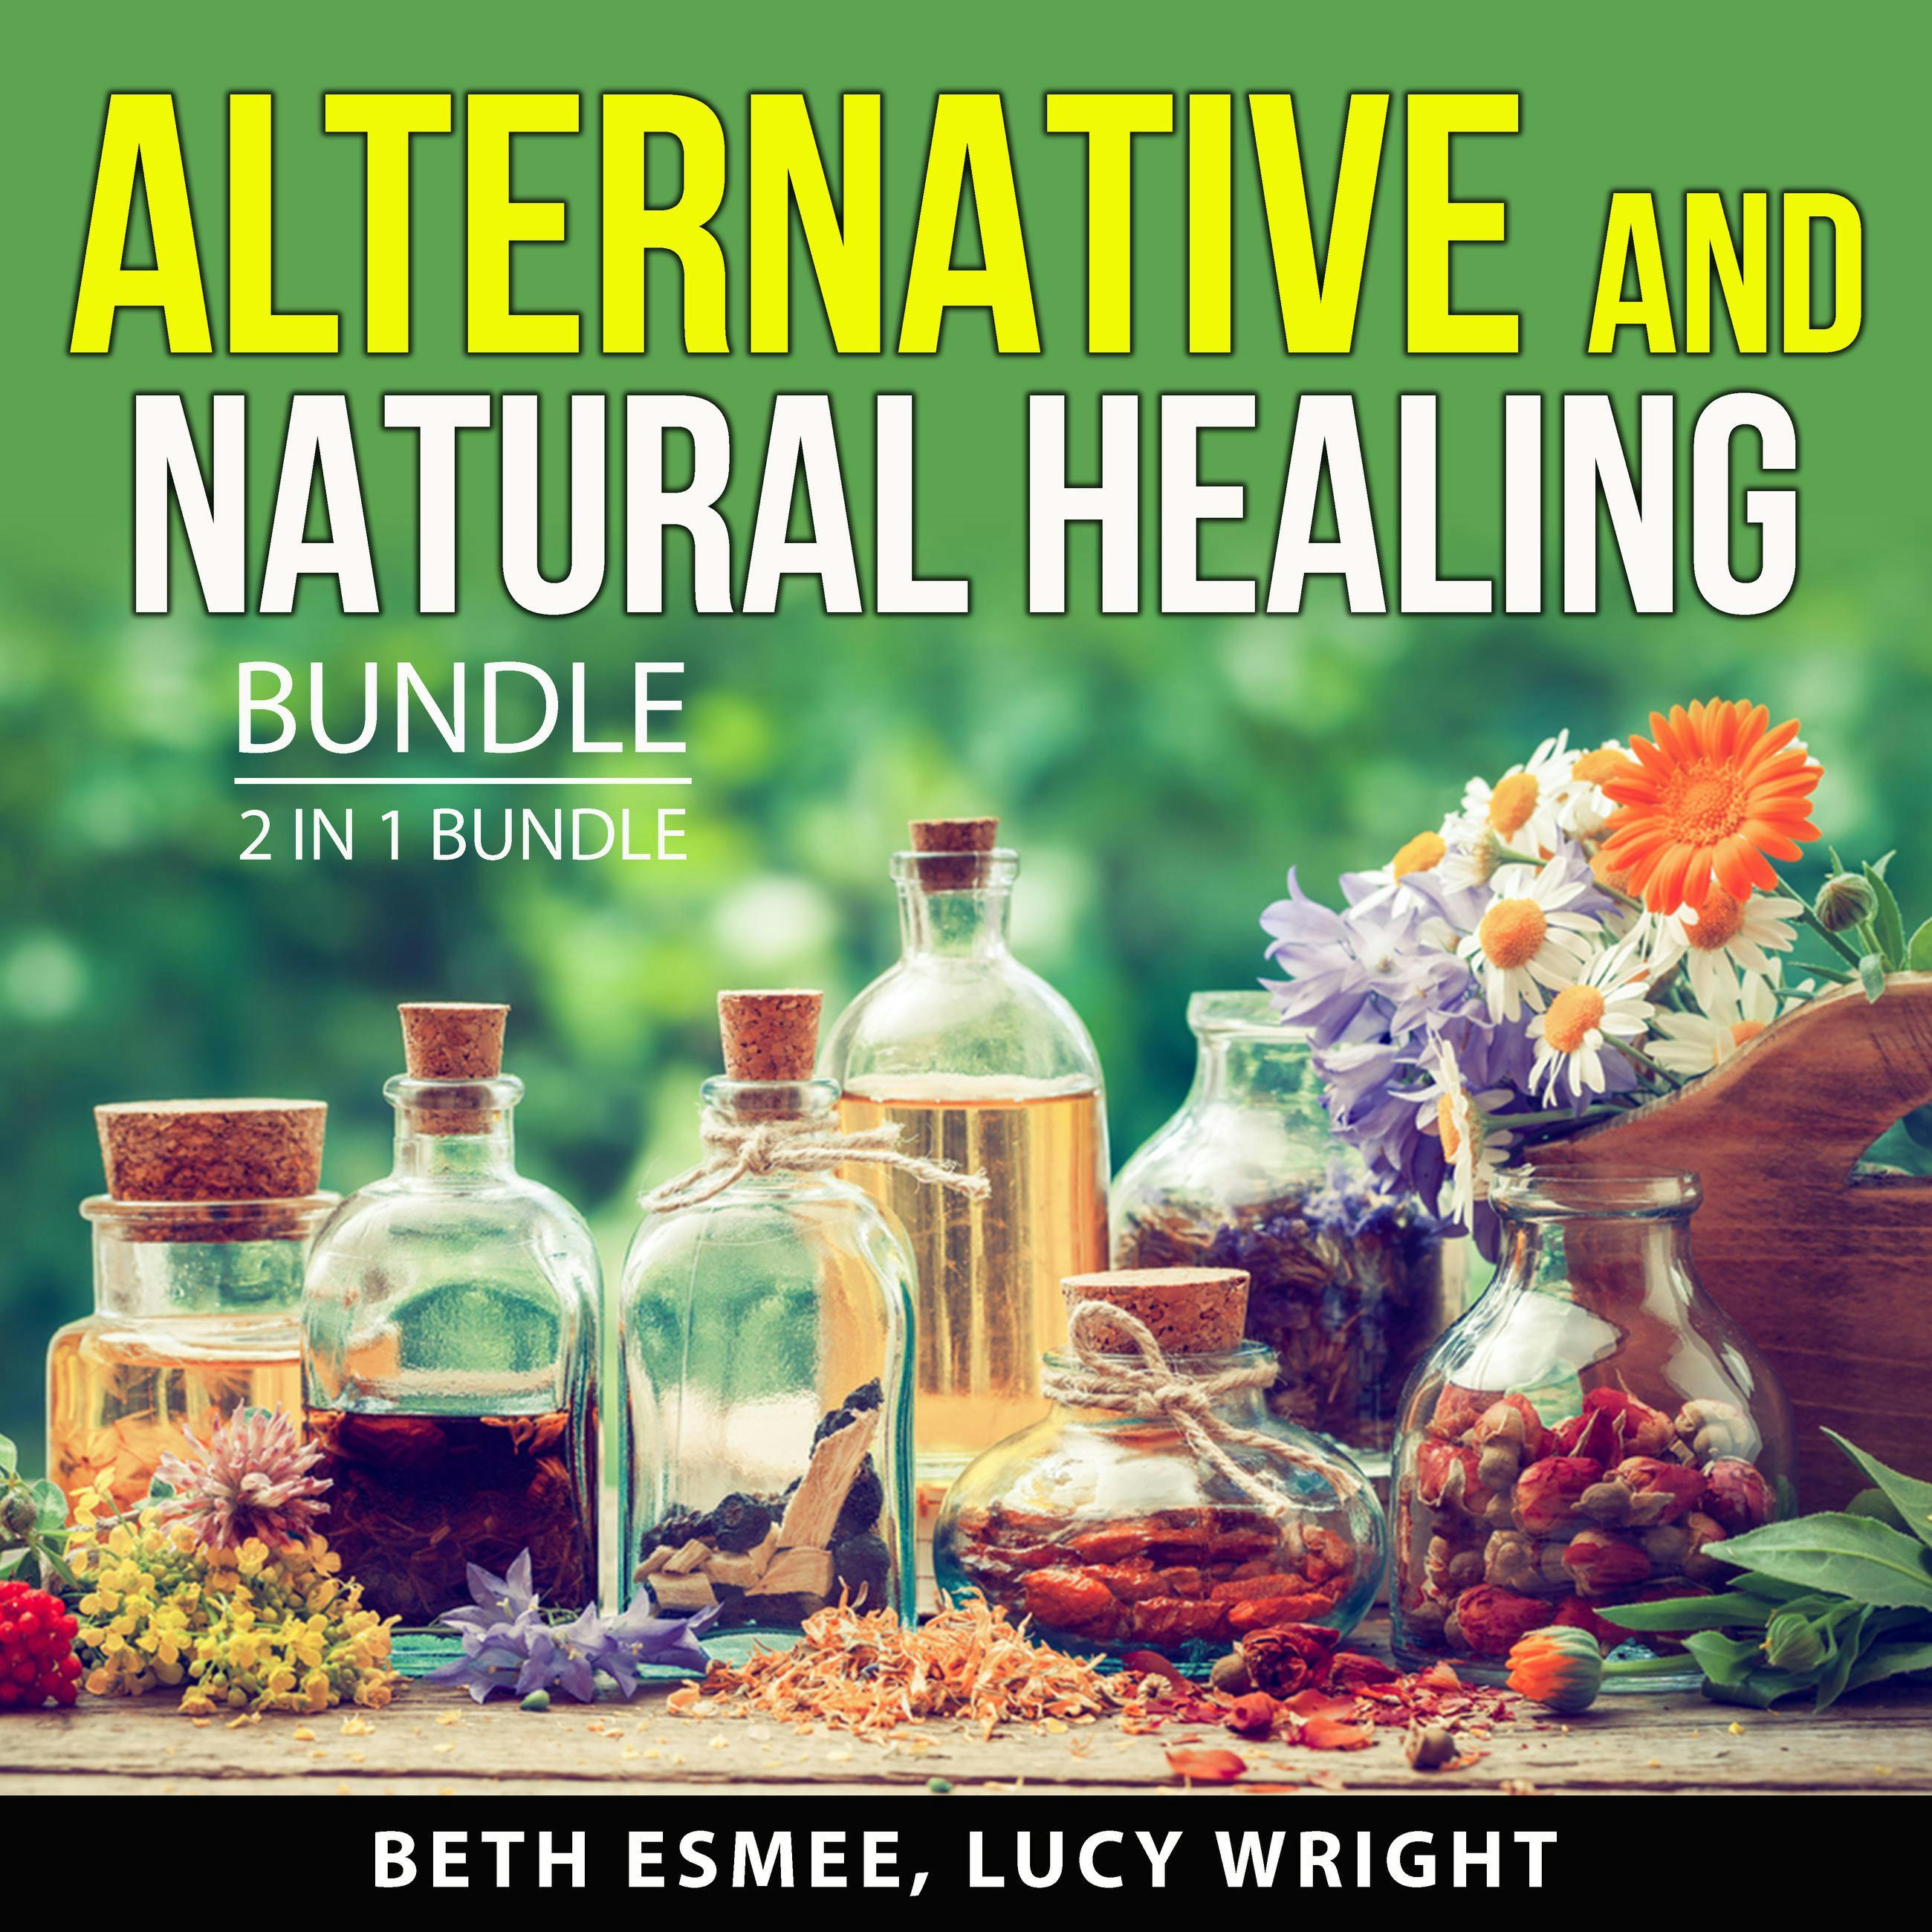 Alternative and Natural Healing Bundle, 2 in 1 Bundle: Healing Through Medicinal Herbs and Natural Cures and Remedies - undefined